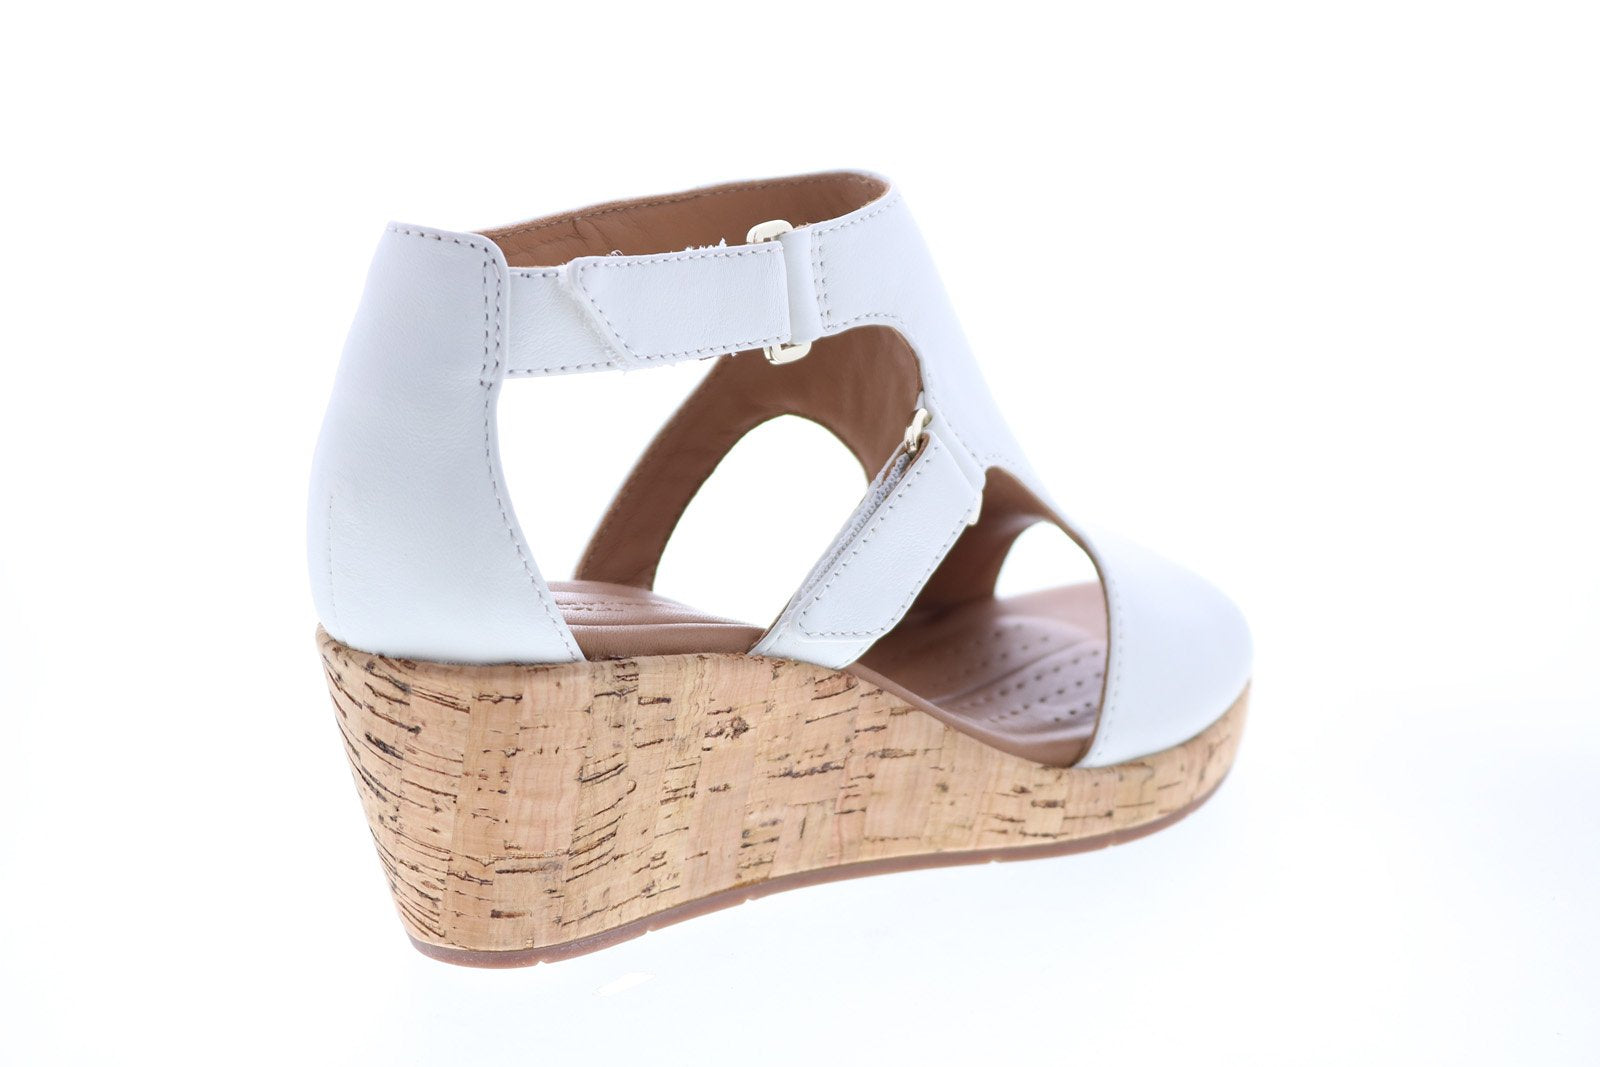 Clarks Un Plaza Strap Womens White Wide Leather Wedges Heels - Shoes